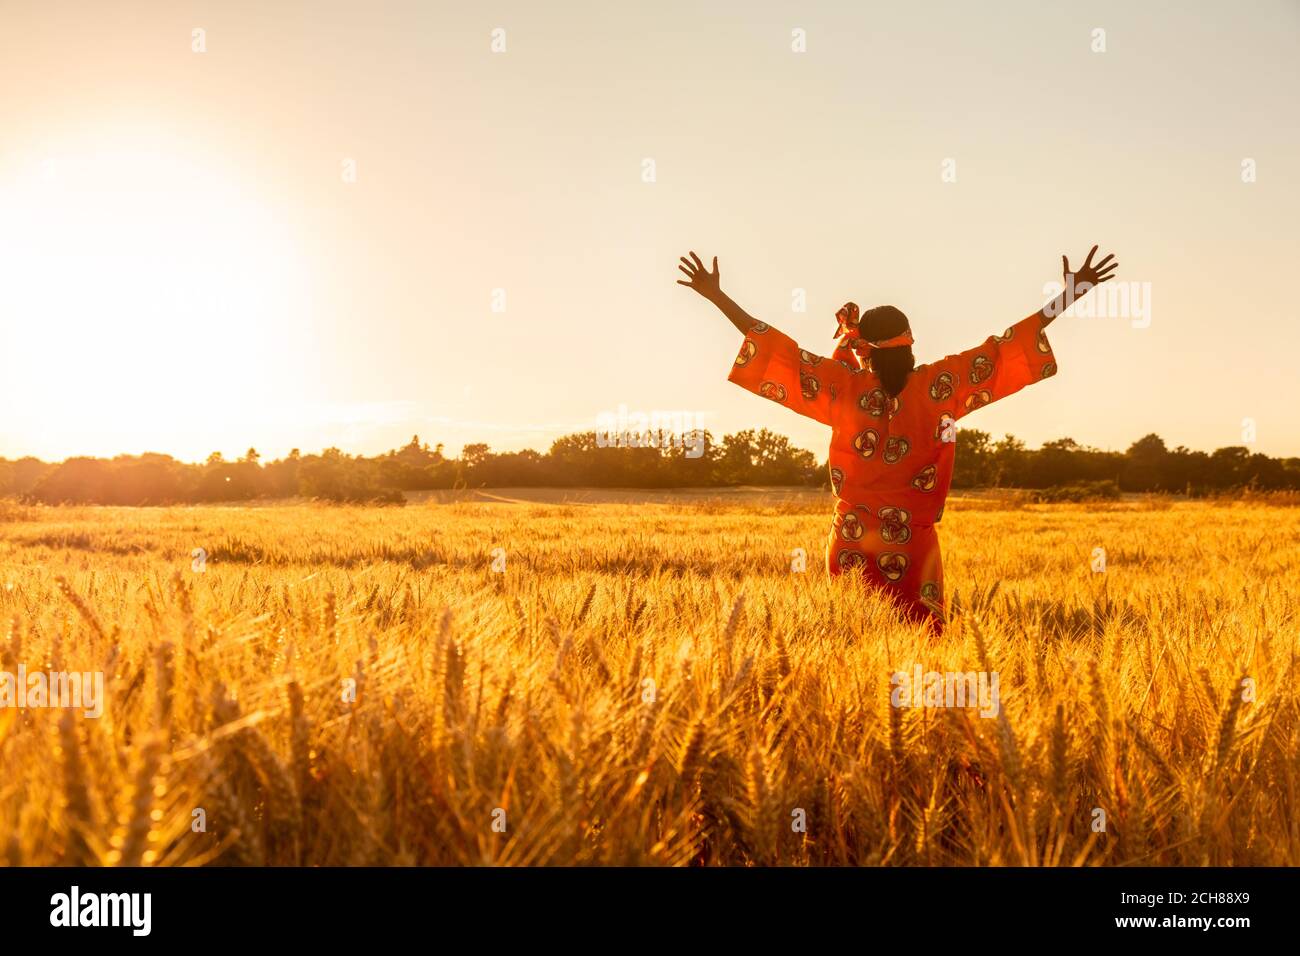 African woman in traditional clothes standing arms raised in field of barley or wheat crops at sunset or sunrise Stock Photo